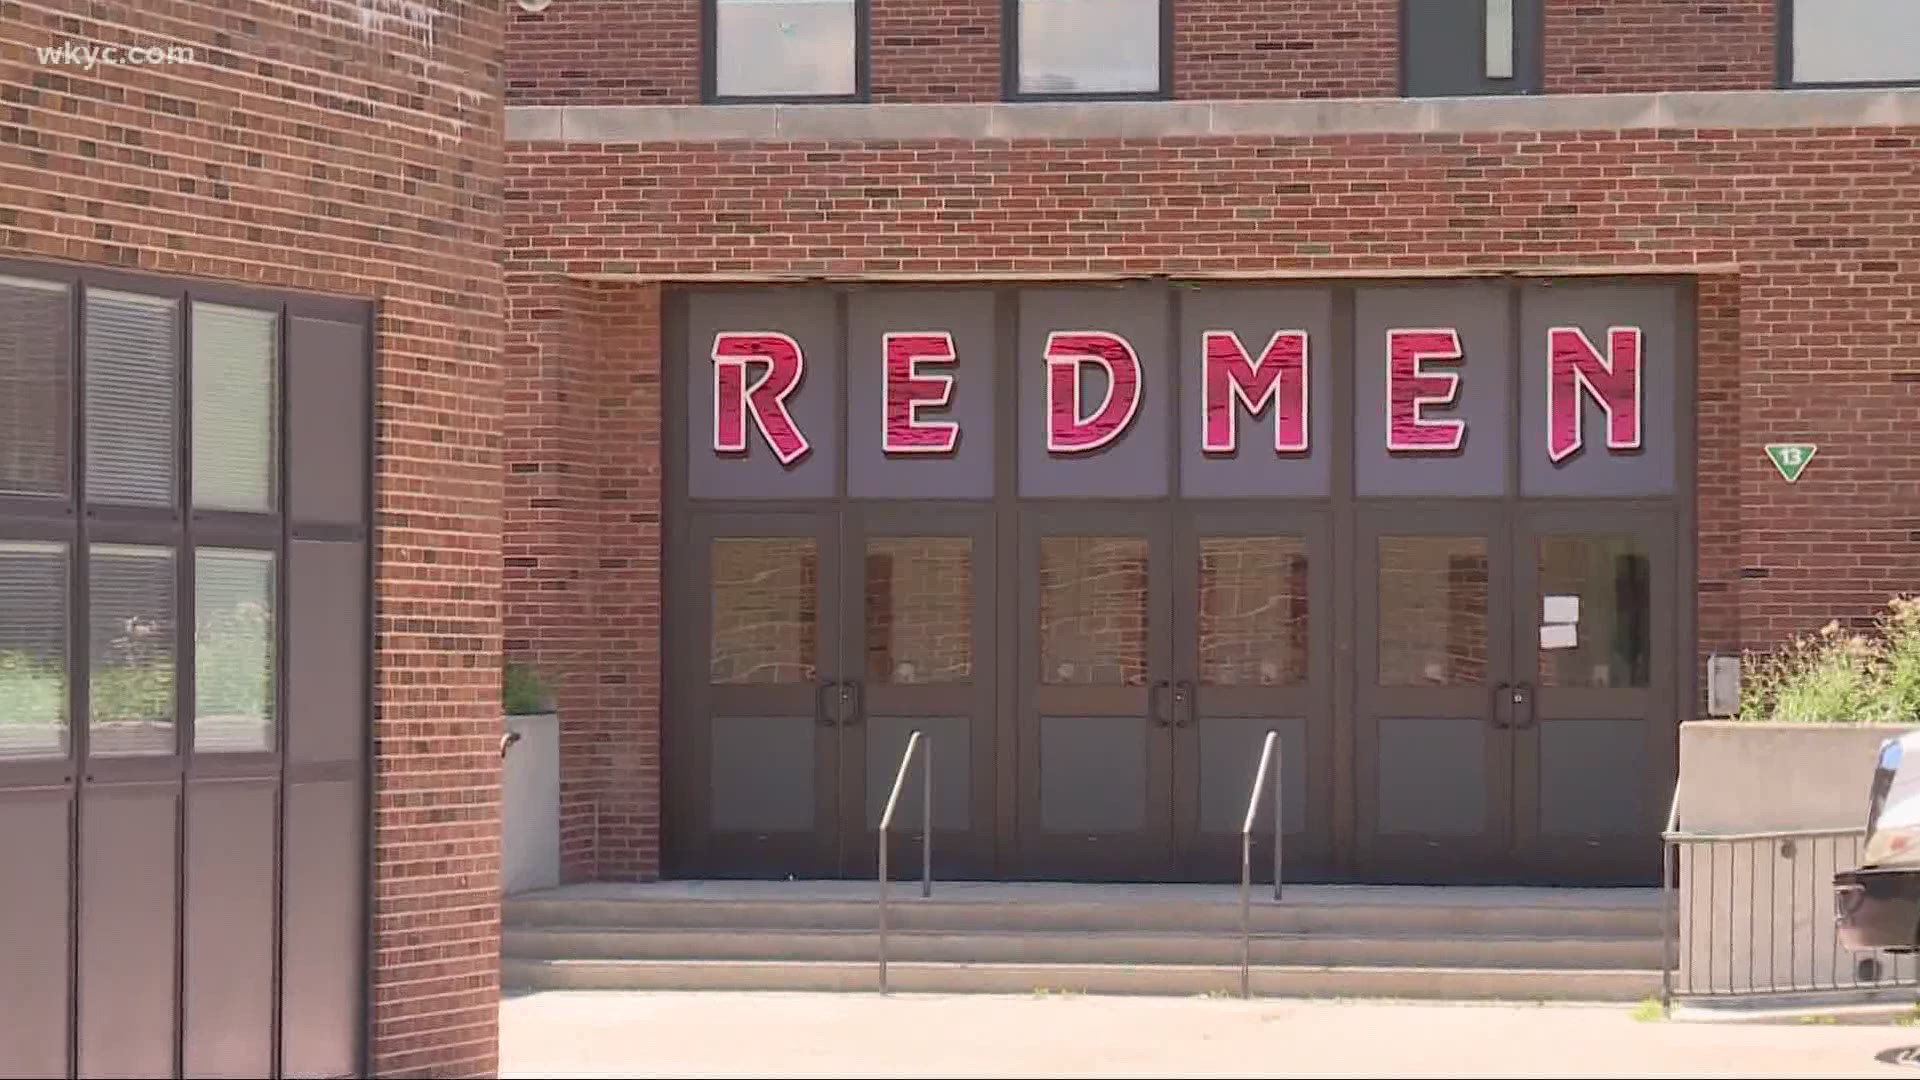 Parma schools will discuss a name change at the senior high school. Right now, teams there are known as the Red Men.